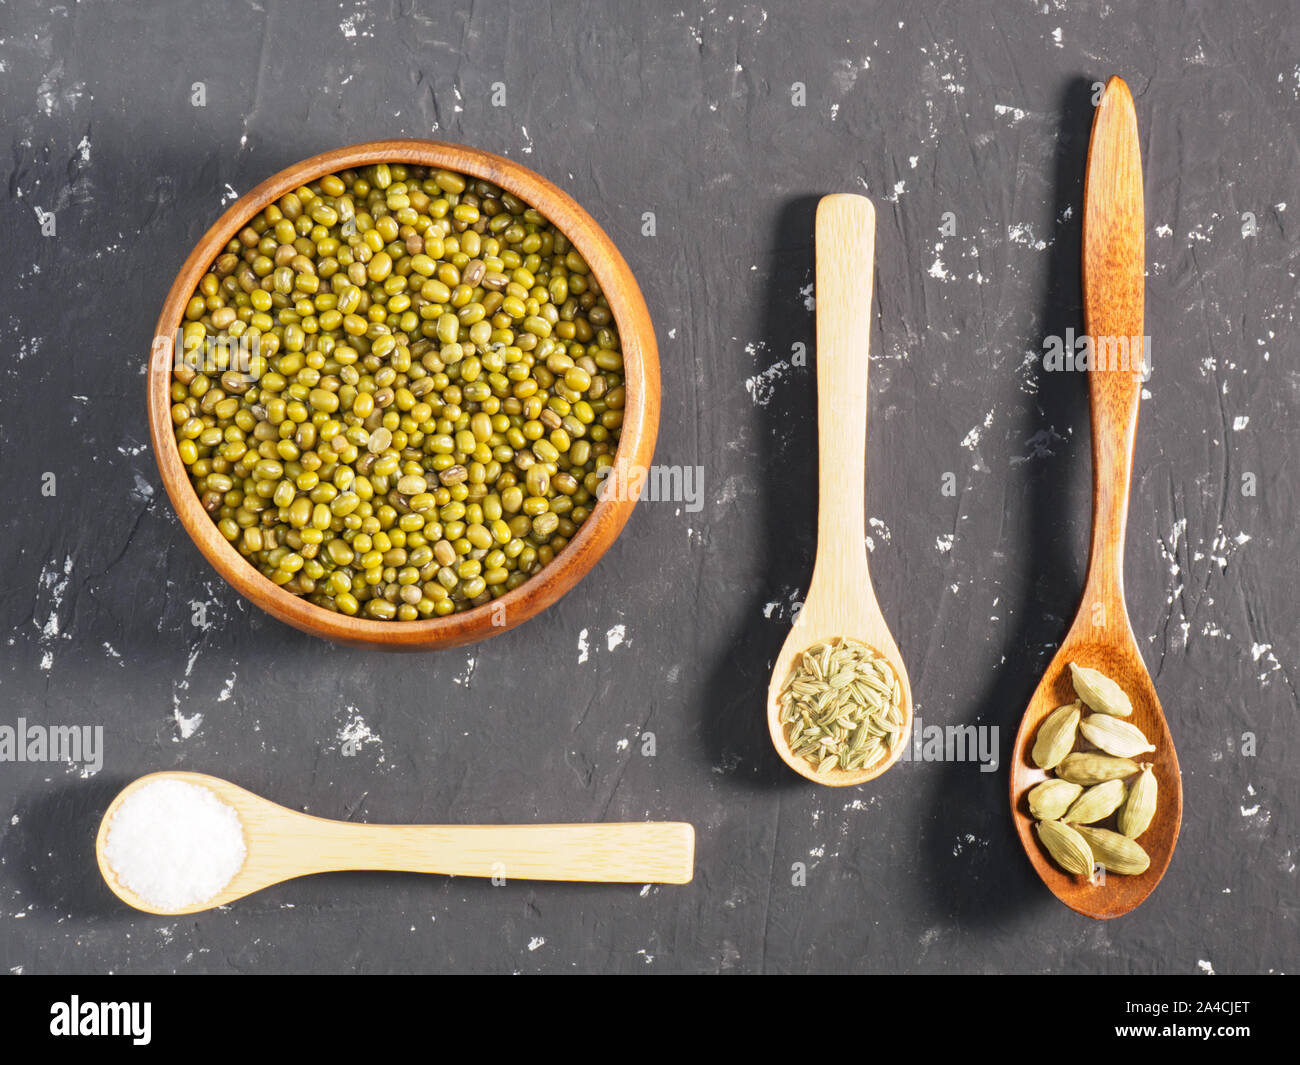 Green gram and spices on a black concrete background. Indian cuisine ingredients Stock Photo